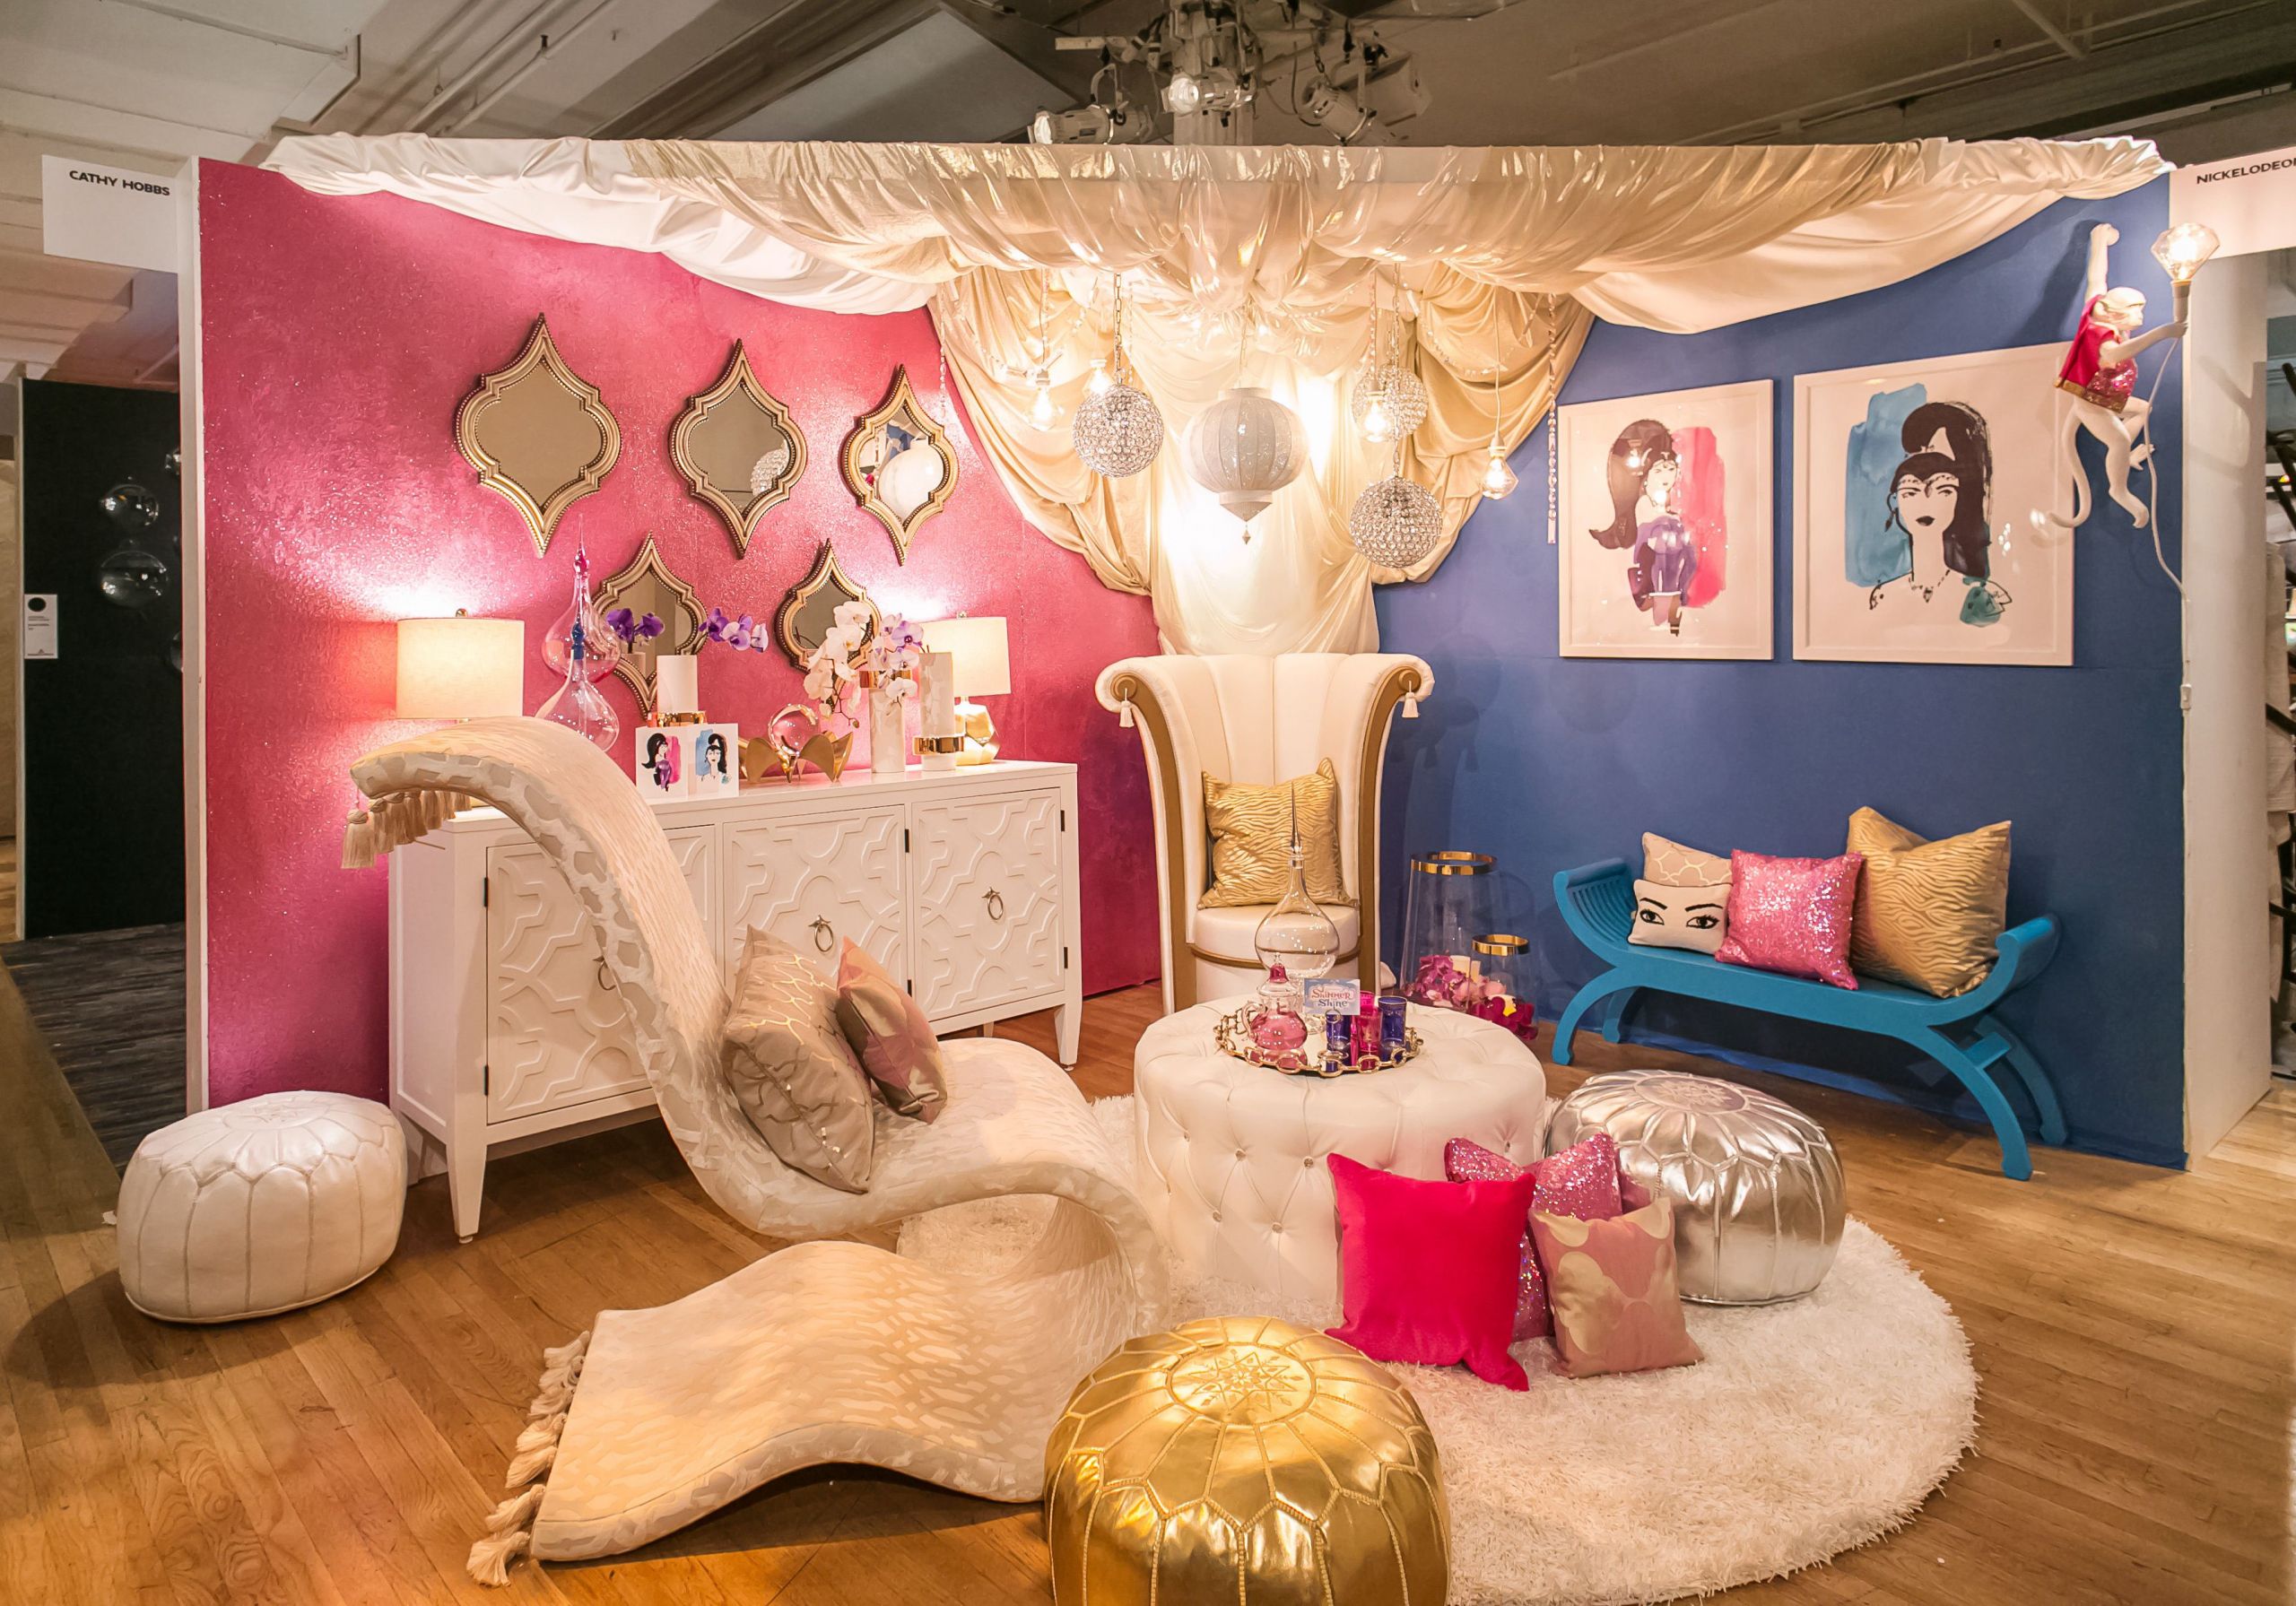 Shimmer And Shine Bedroom Decor
 Shimmer and Shine Design on a Dime